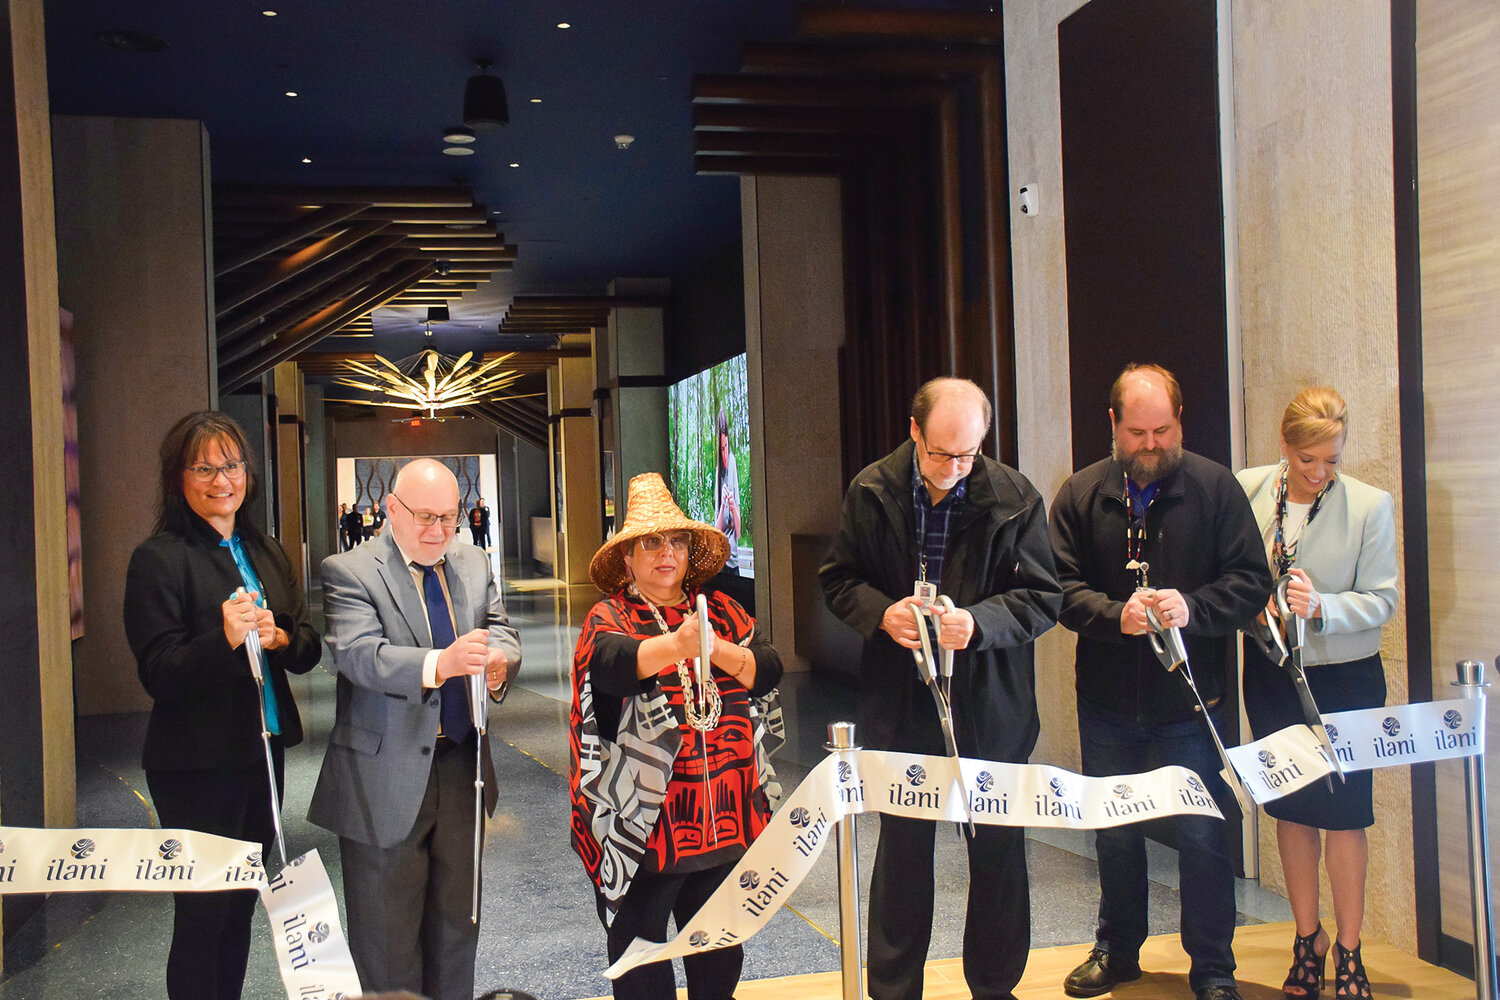 Officials cut the ribbon on ilani’s new hotel during a grand opening of the facility on April 24.